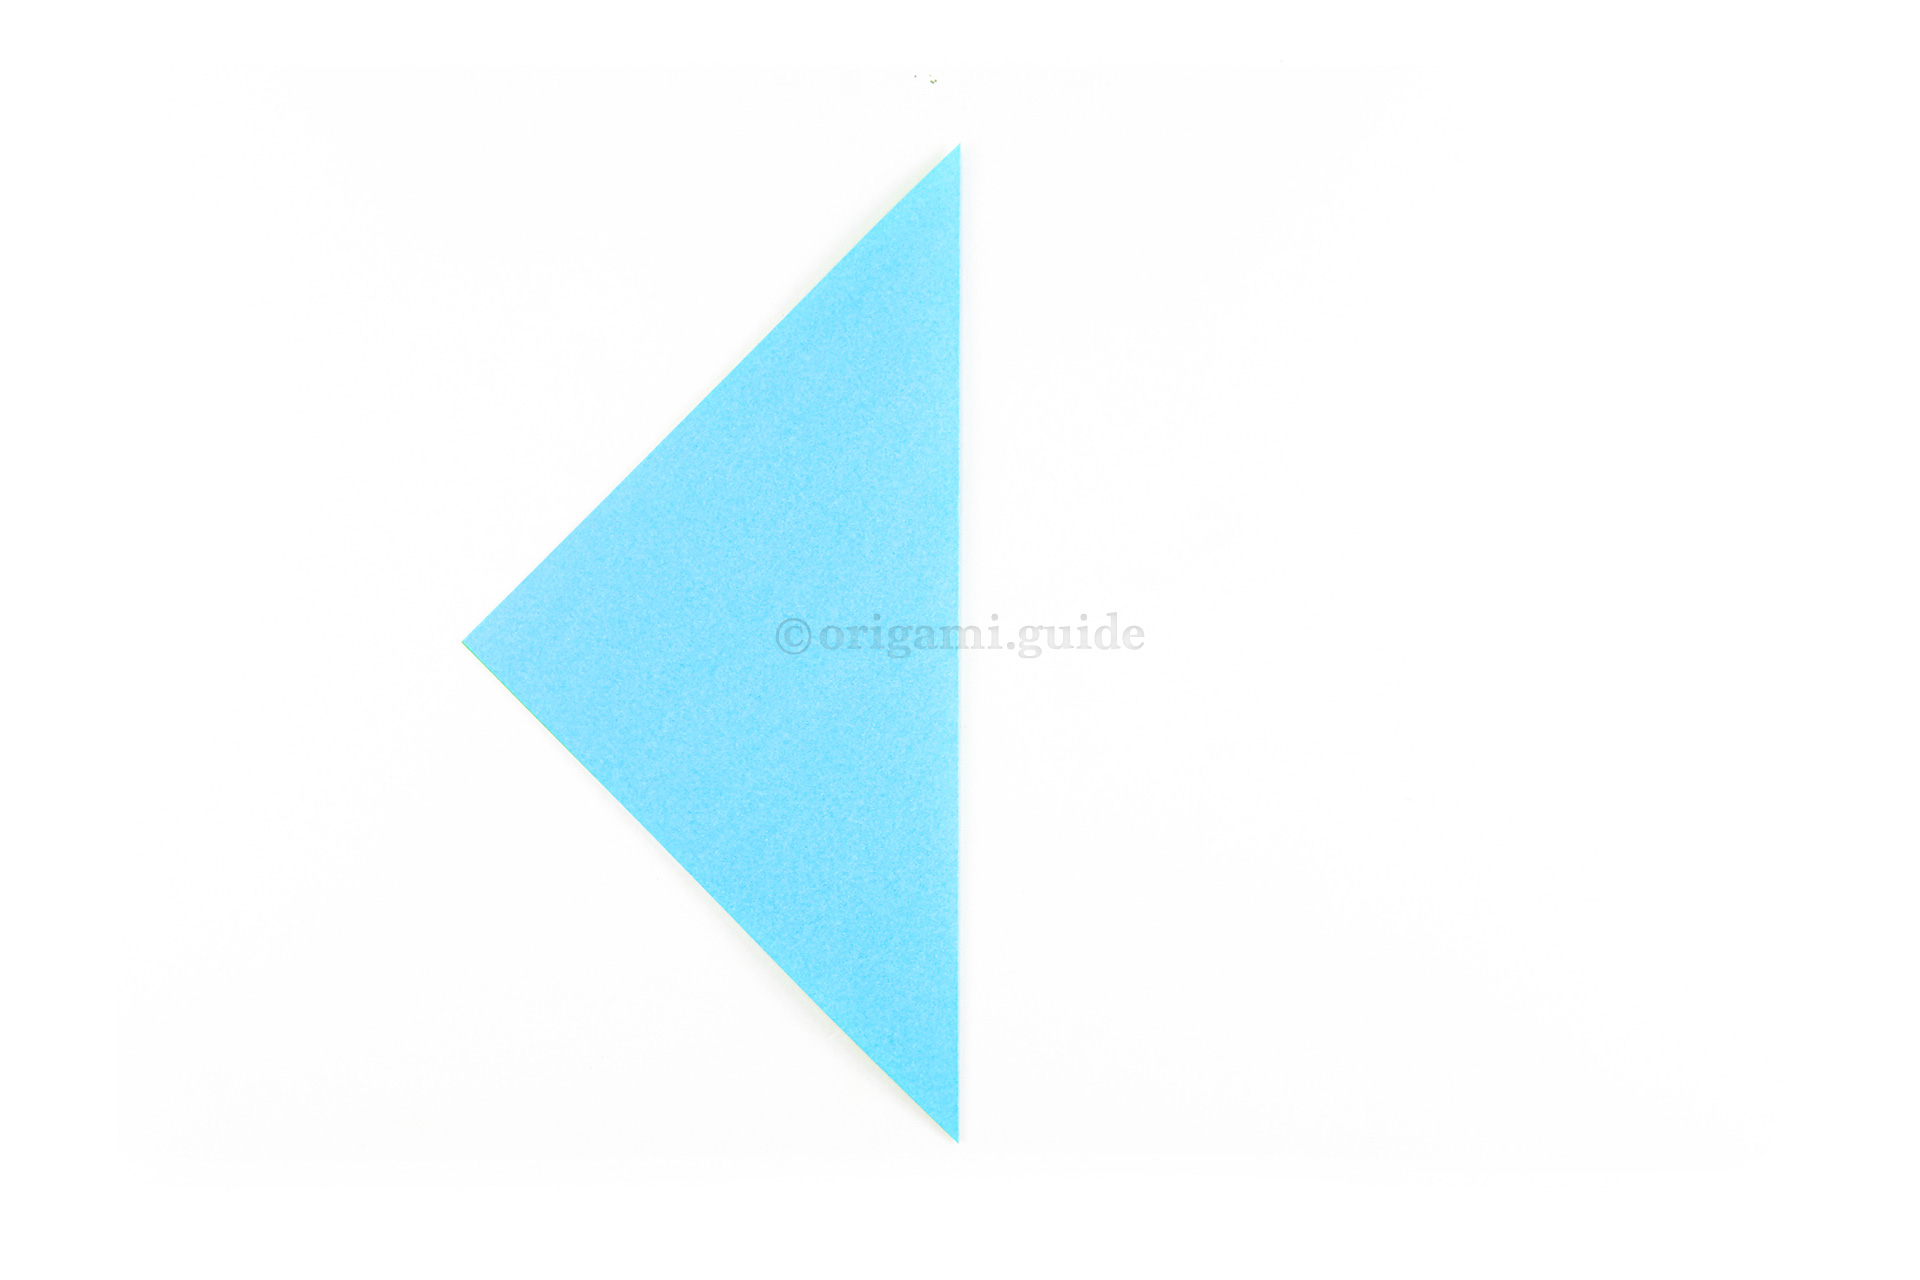 Starting with the paper rotated to a diamond, fold the right point over to the left point.